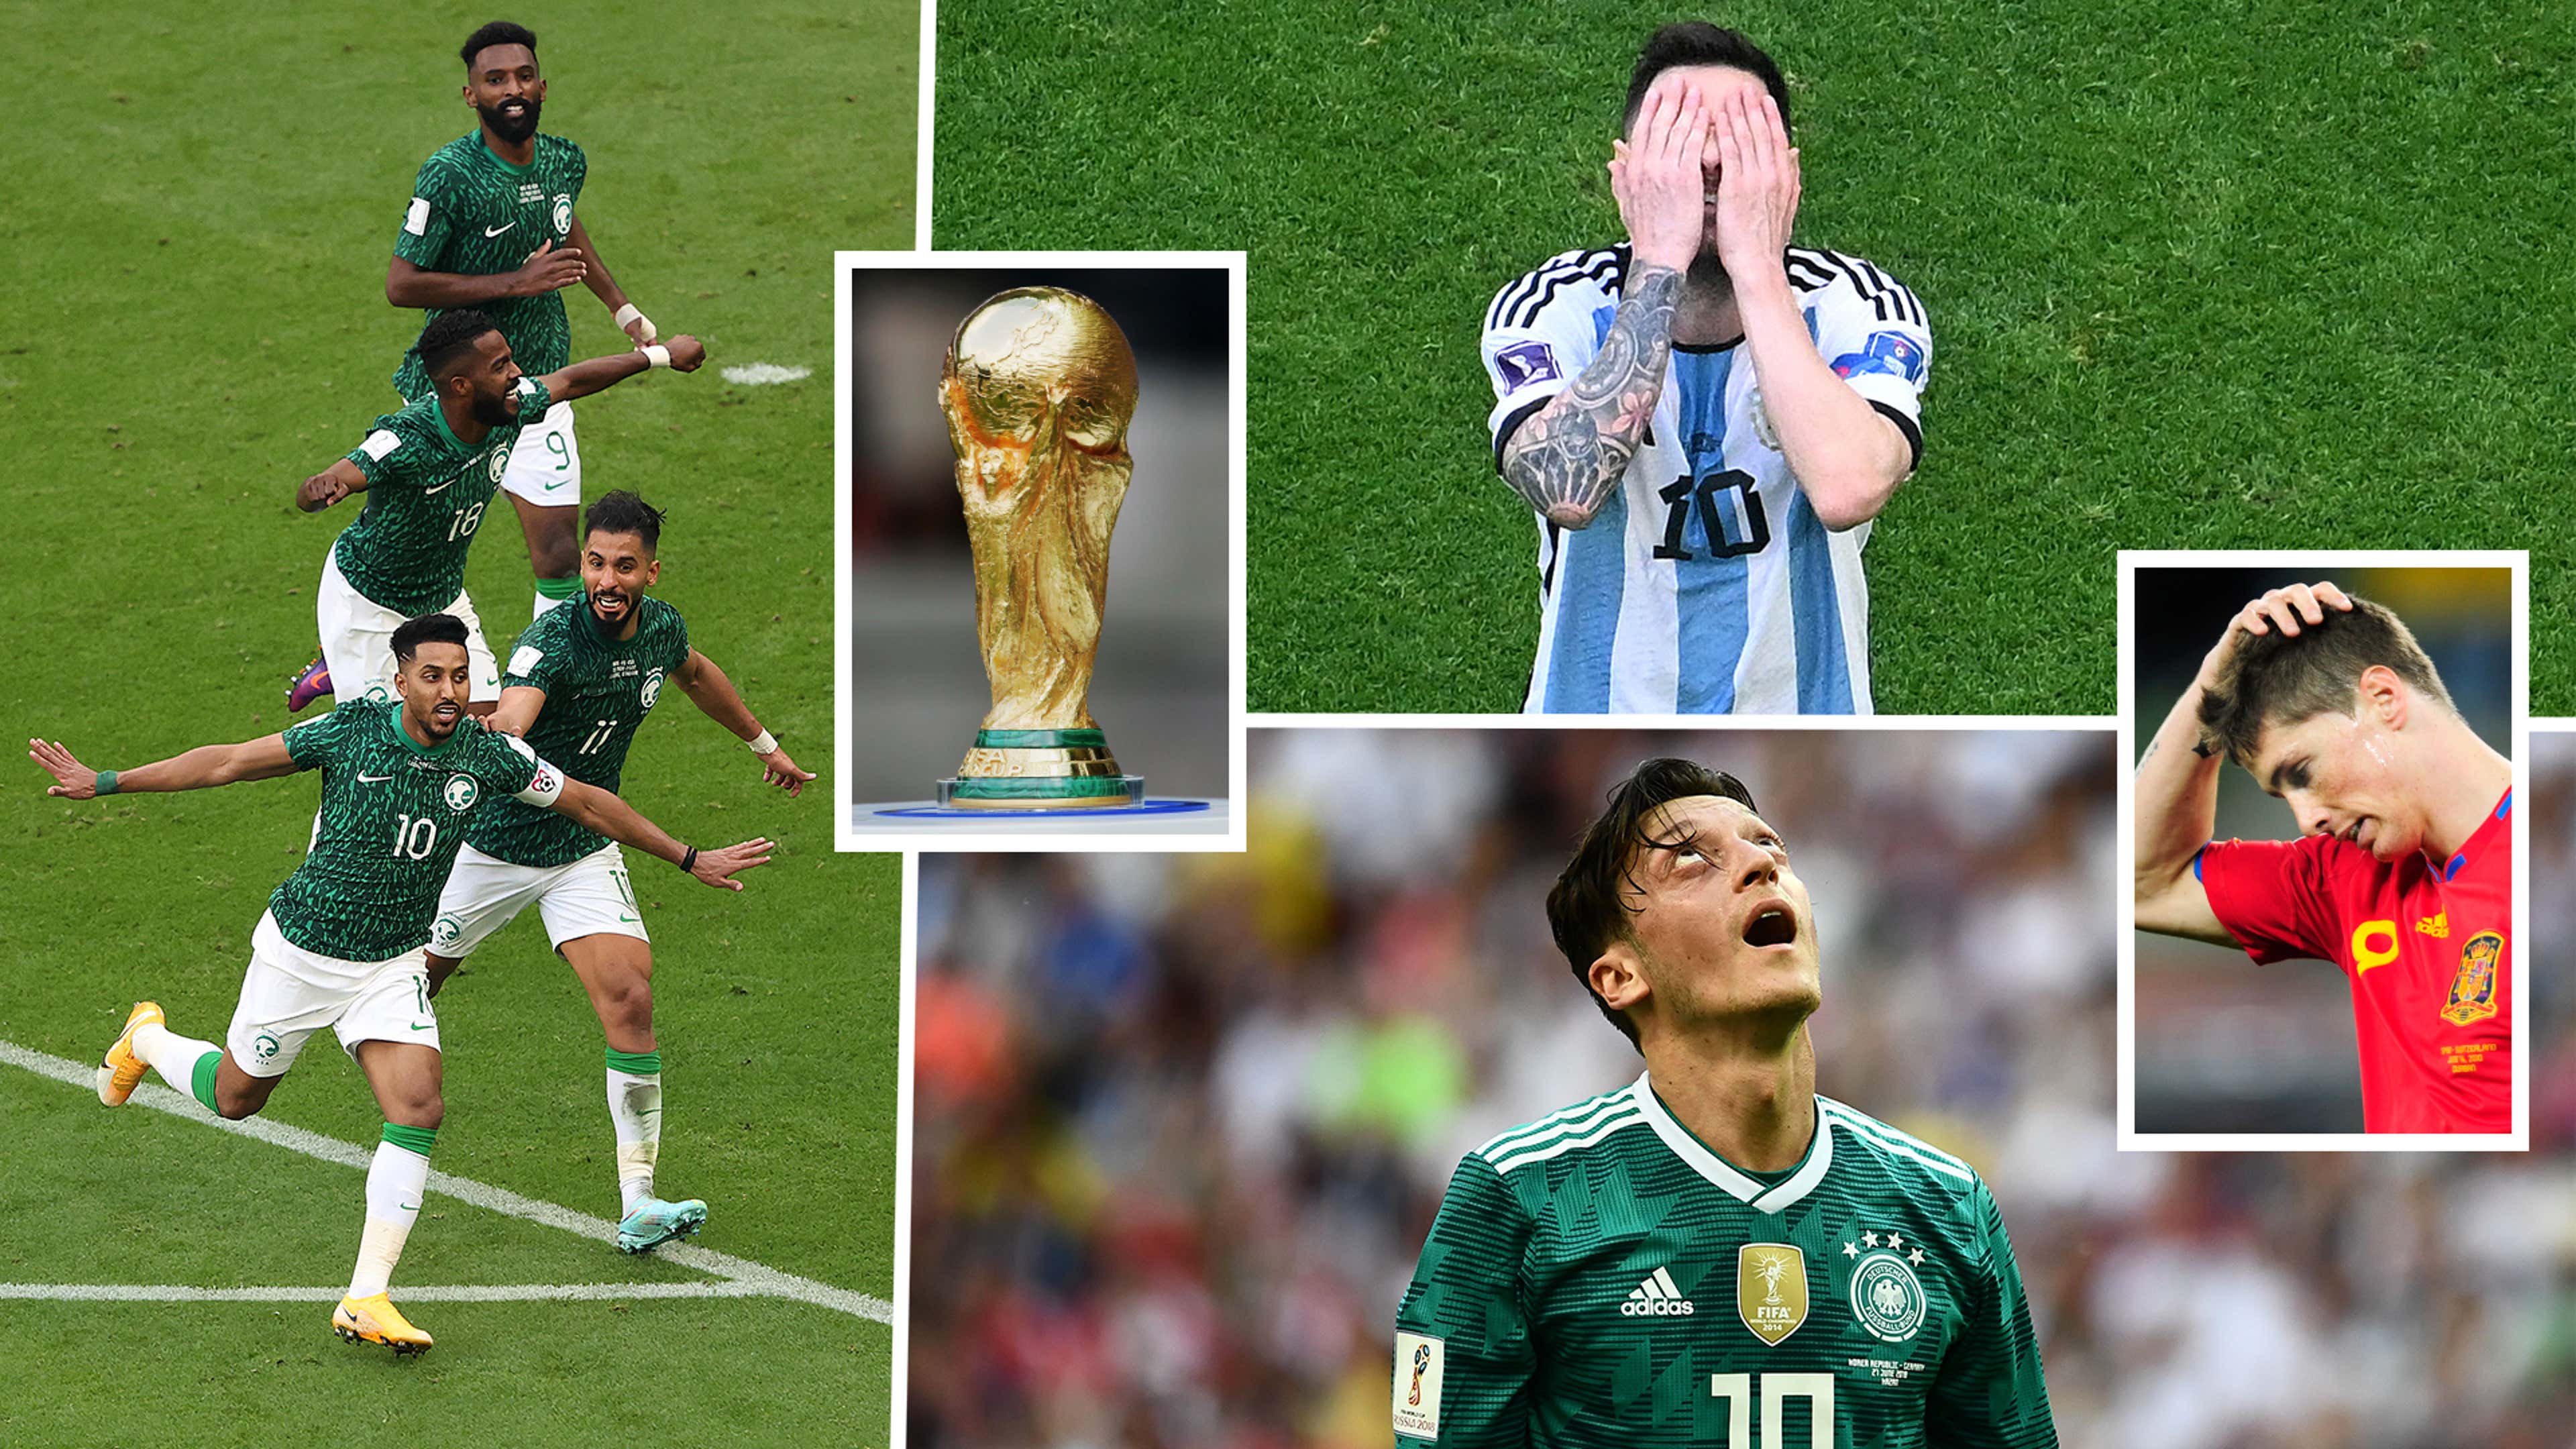 Germany 1-0 Argentina: An Analysis of the World Cup Final